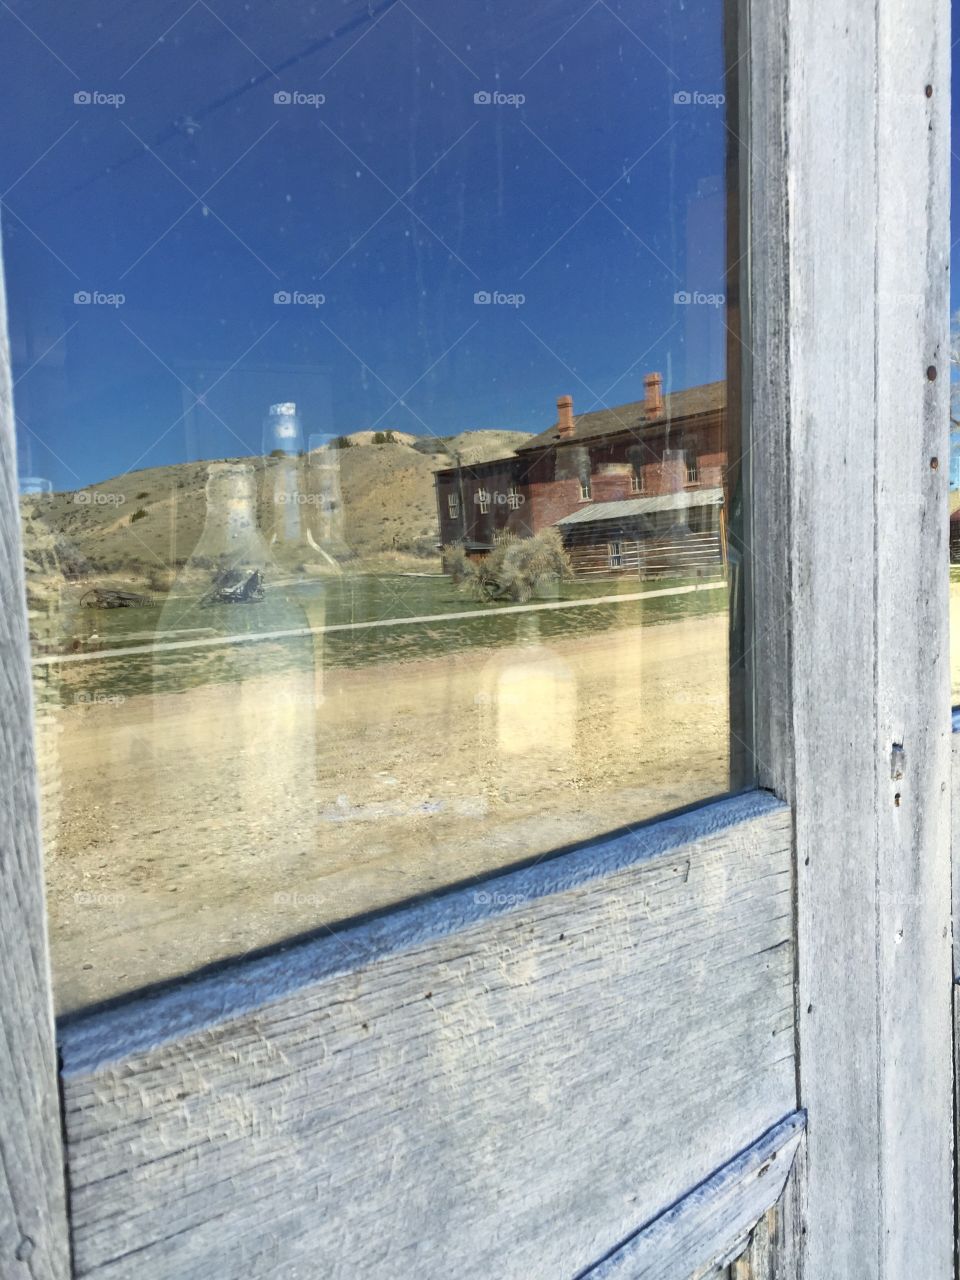 Ghost town reflected on an old window. Old bottles visible through window.  